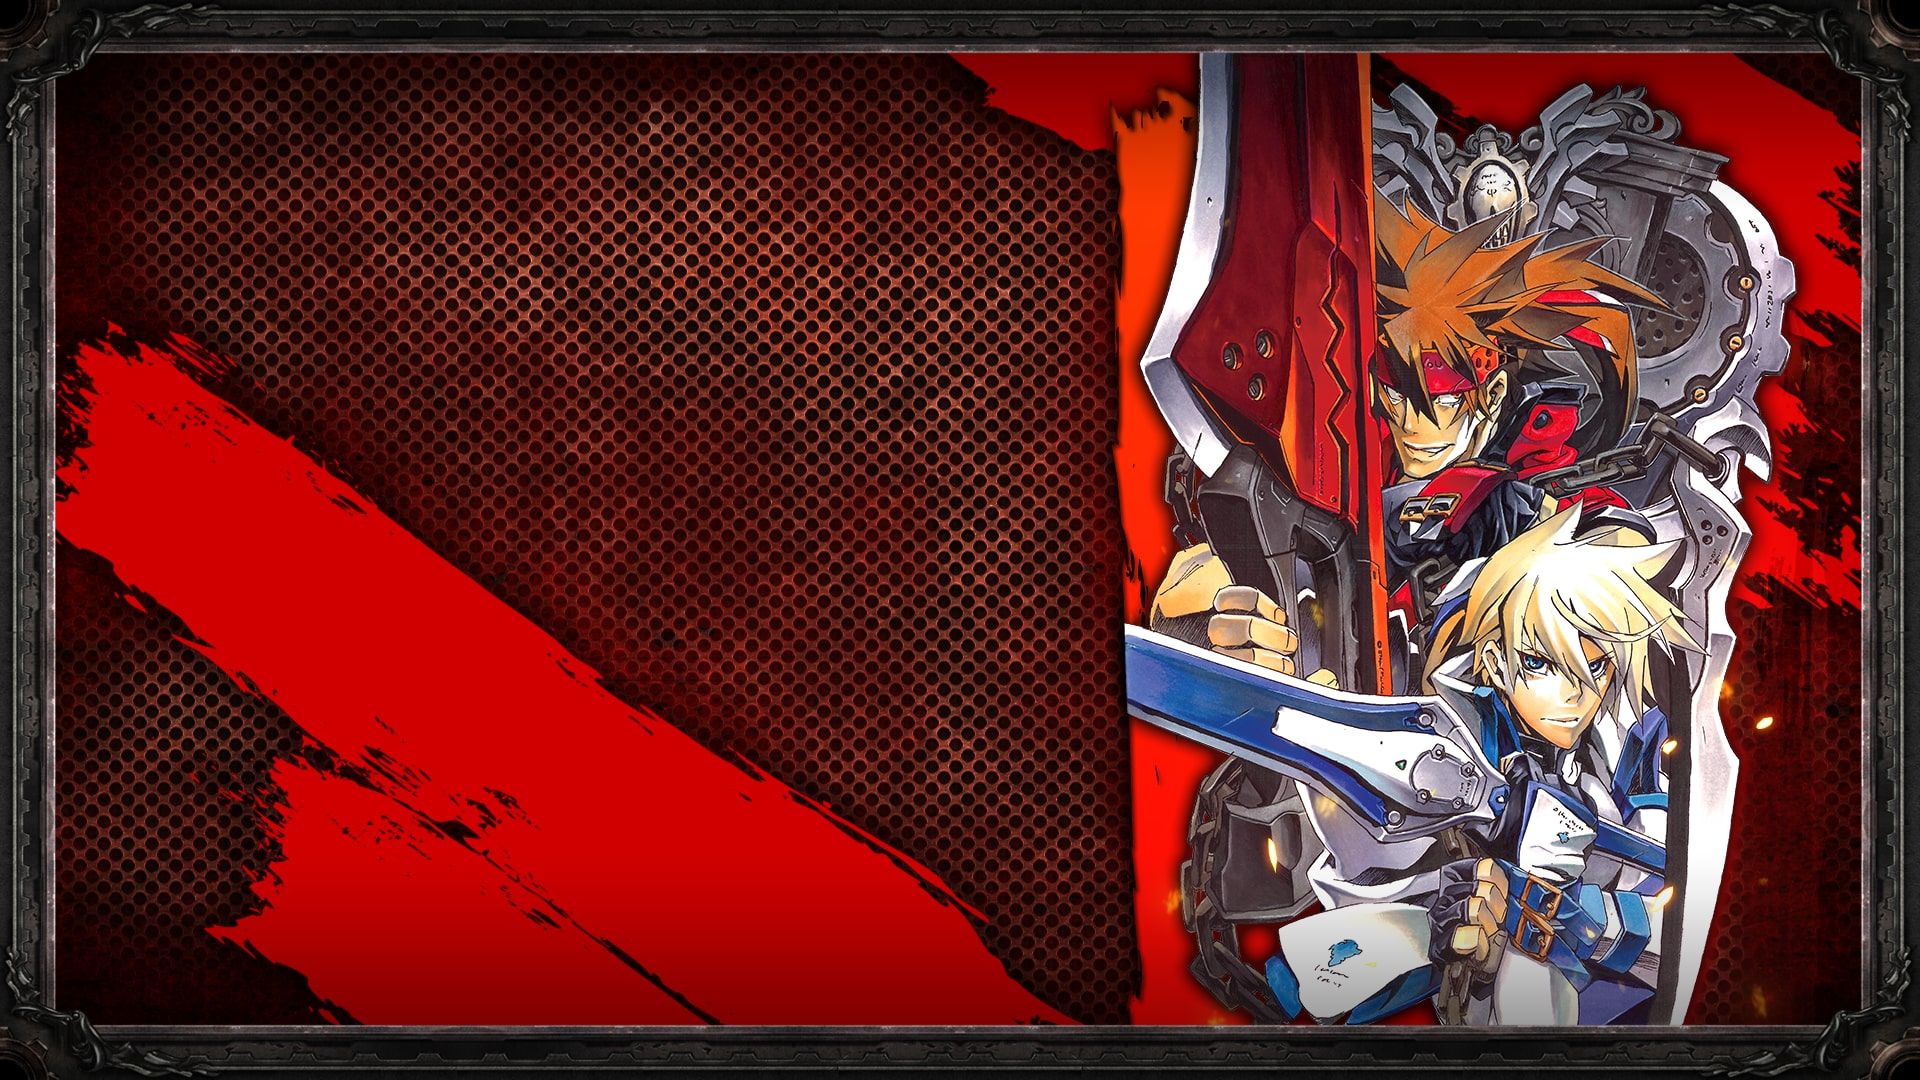 Guilty Gear Xrd -SIGN- Trophy cover image